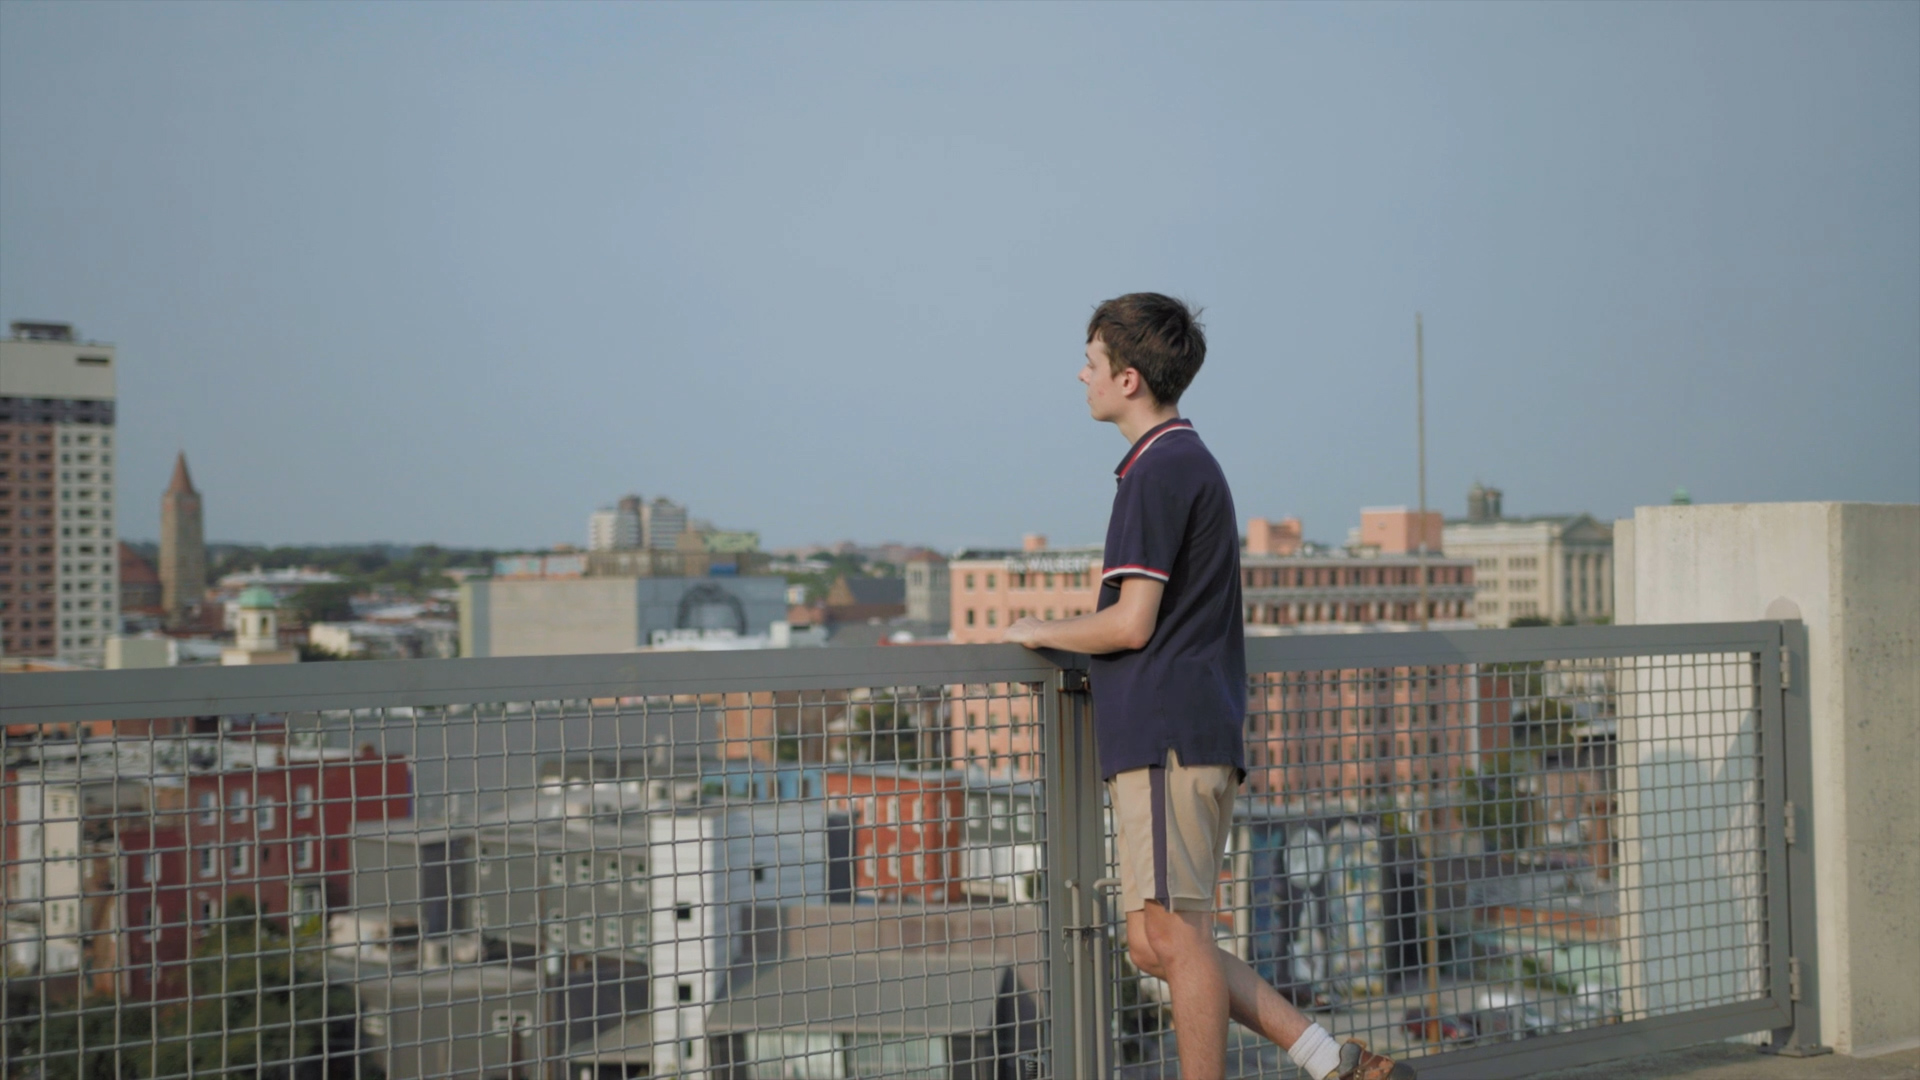 Person stands against wire fence on rooftop and looks out over a city.